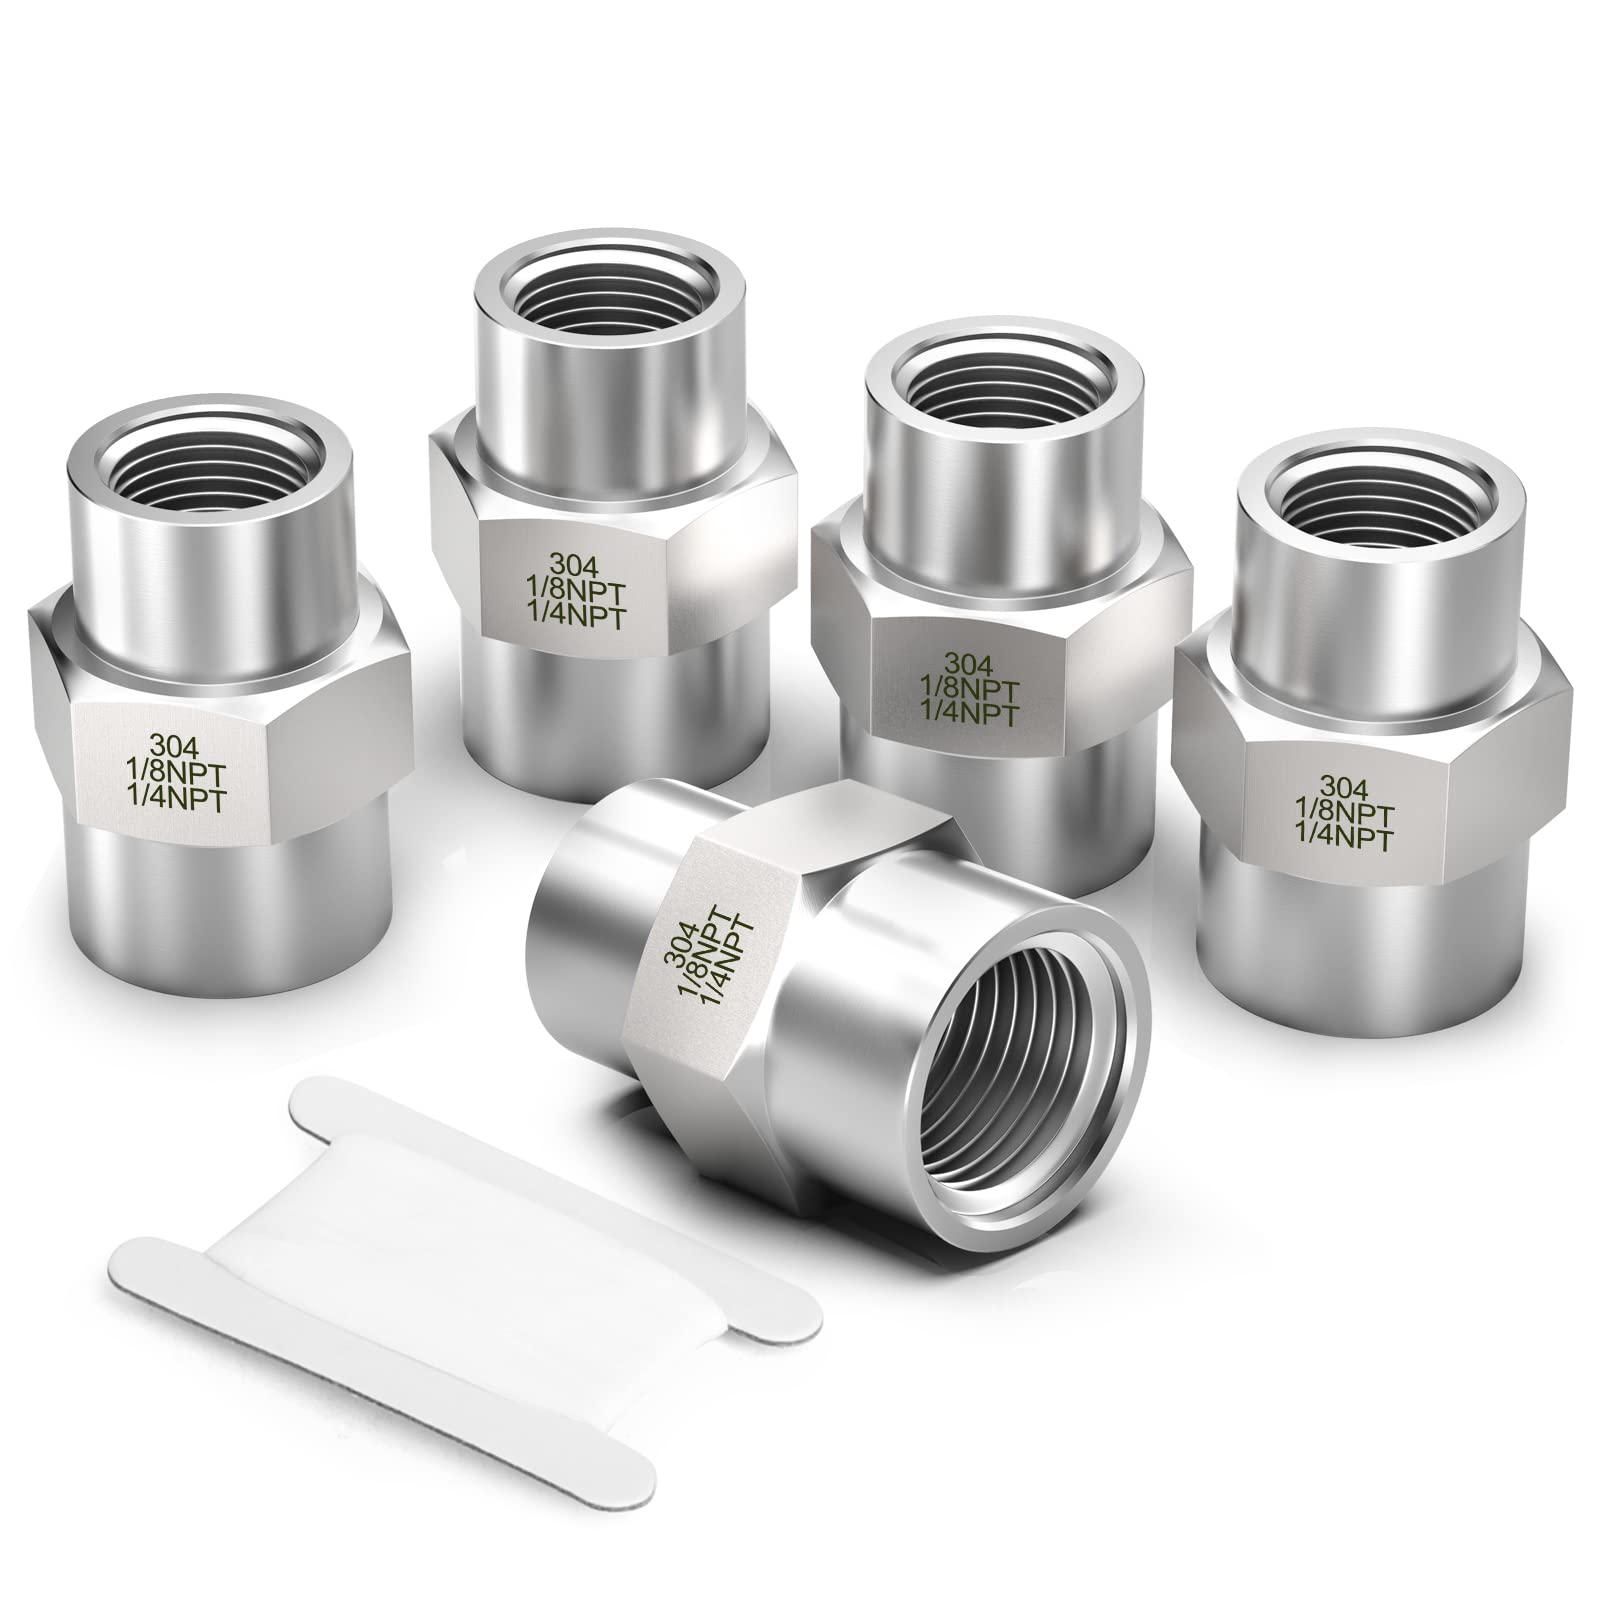 Taisher 5Pcs Forging Of 304 Stainless Steel Pipe Fitting, Coupling, 14-Inch Female Pipe X 18-Inch Female Pipe